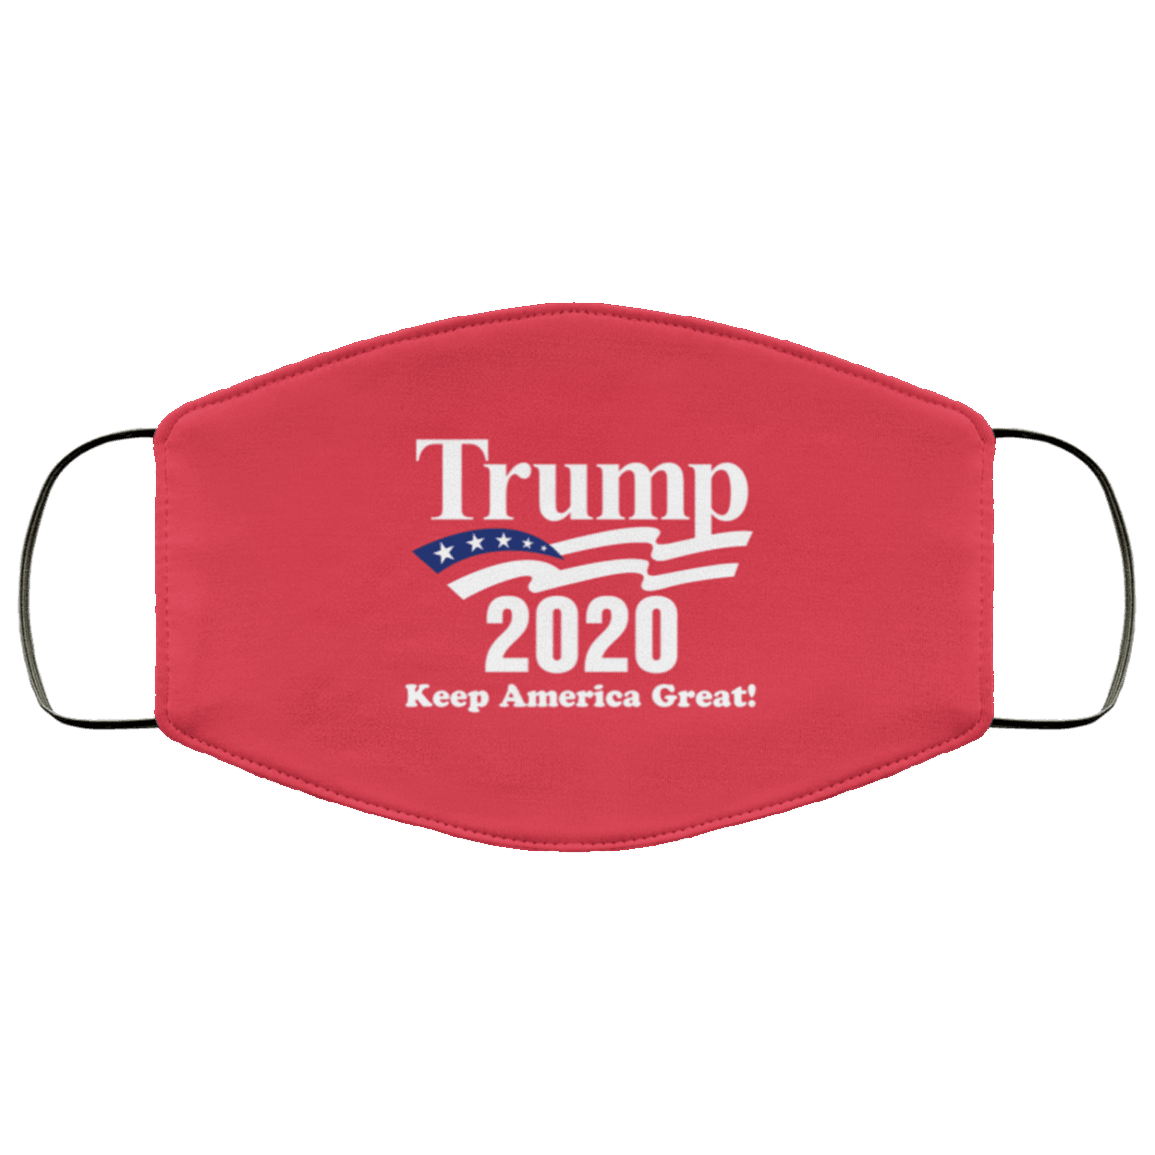 Designs by MyUtopia Shout Out:Trump 2020 Waiving Flag Adult Fabric Face Mask with Elastic Ear Loops,3 Layer Face Mask / Red / Adult,Fabric Face Mask